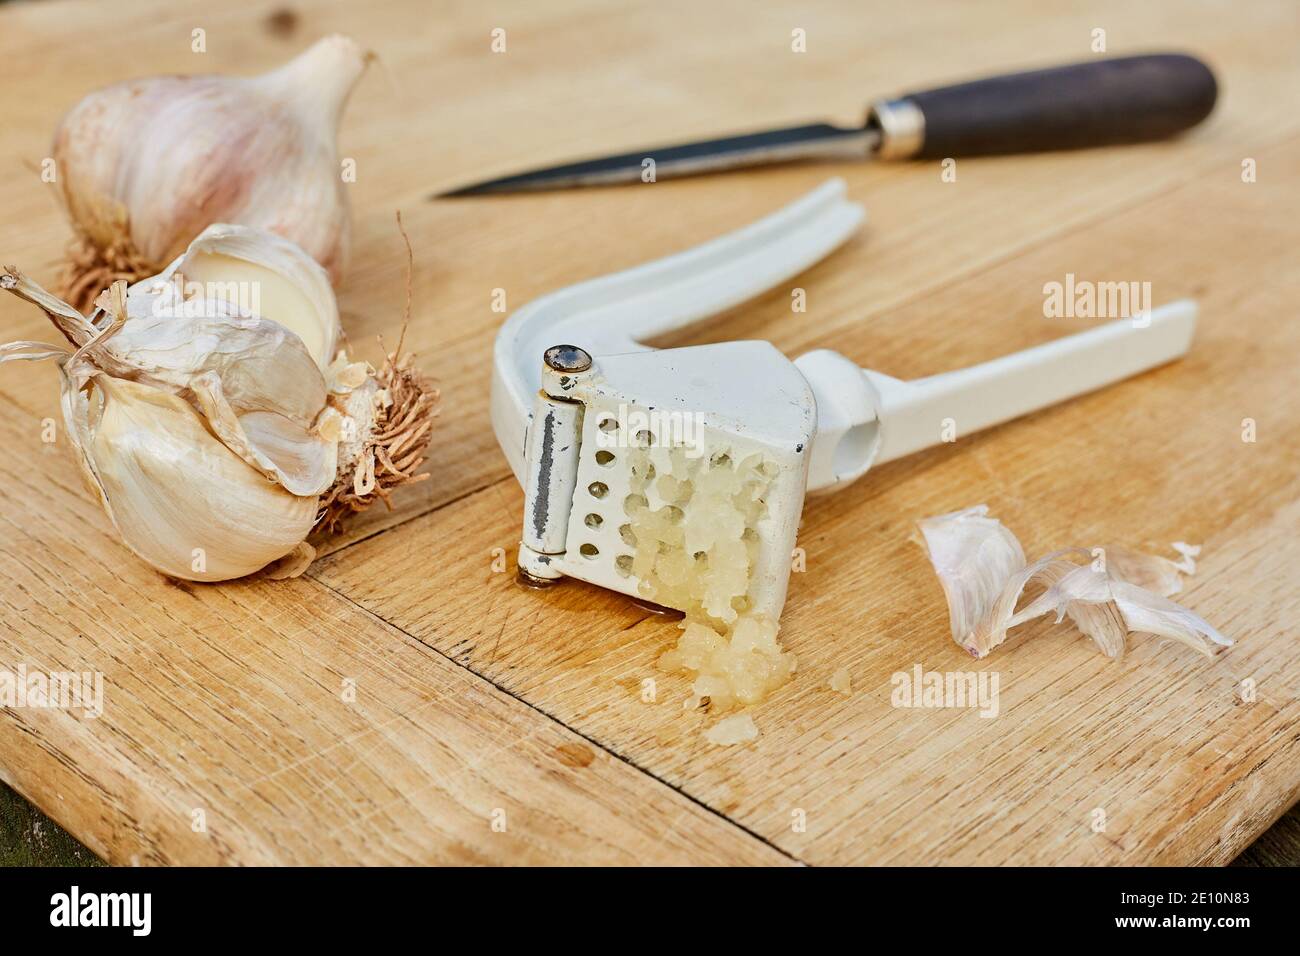 Garlic Bulbs, Knife, and Press on Cutting Board with Freshly Pressed Garlic, Horizontal View 2 Stock Photo